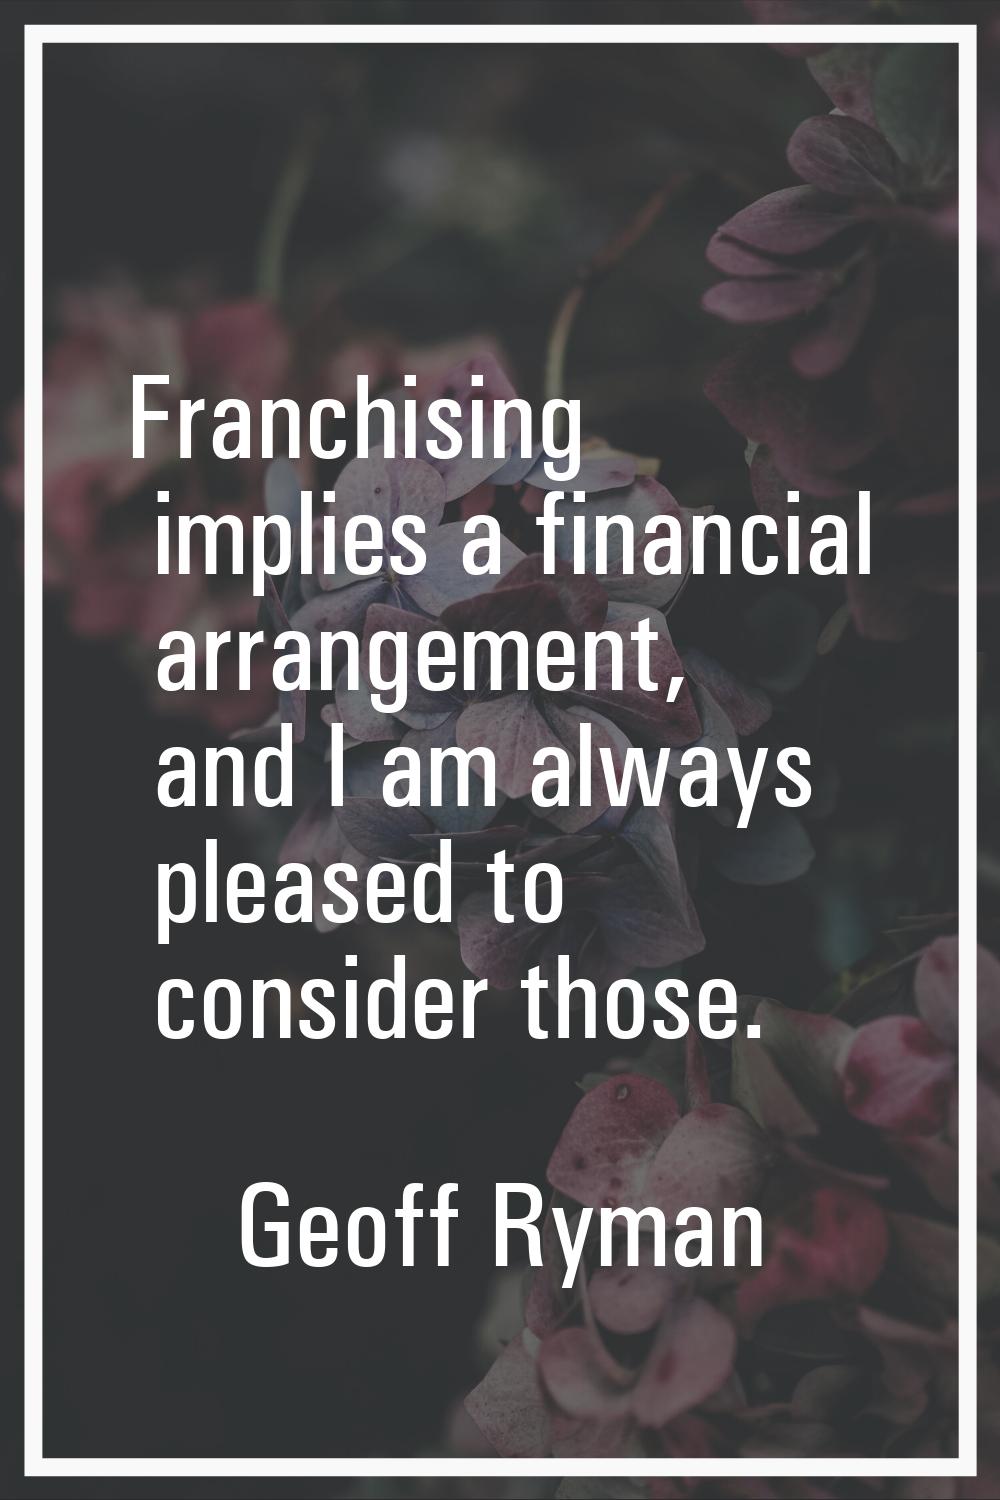 Franchising implies a financial arrangement, and I am always pleased to consider those.